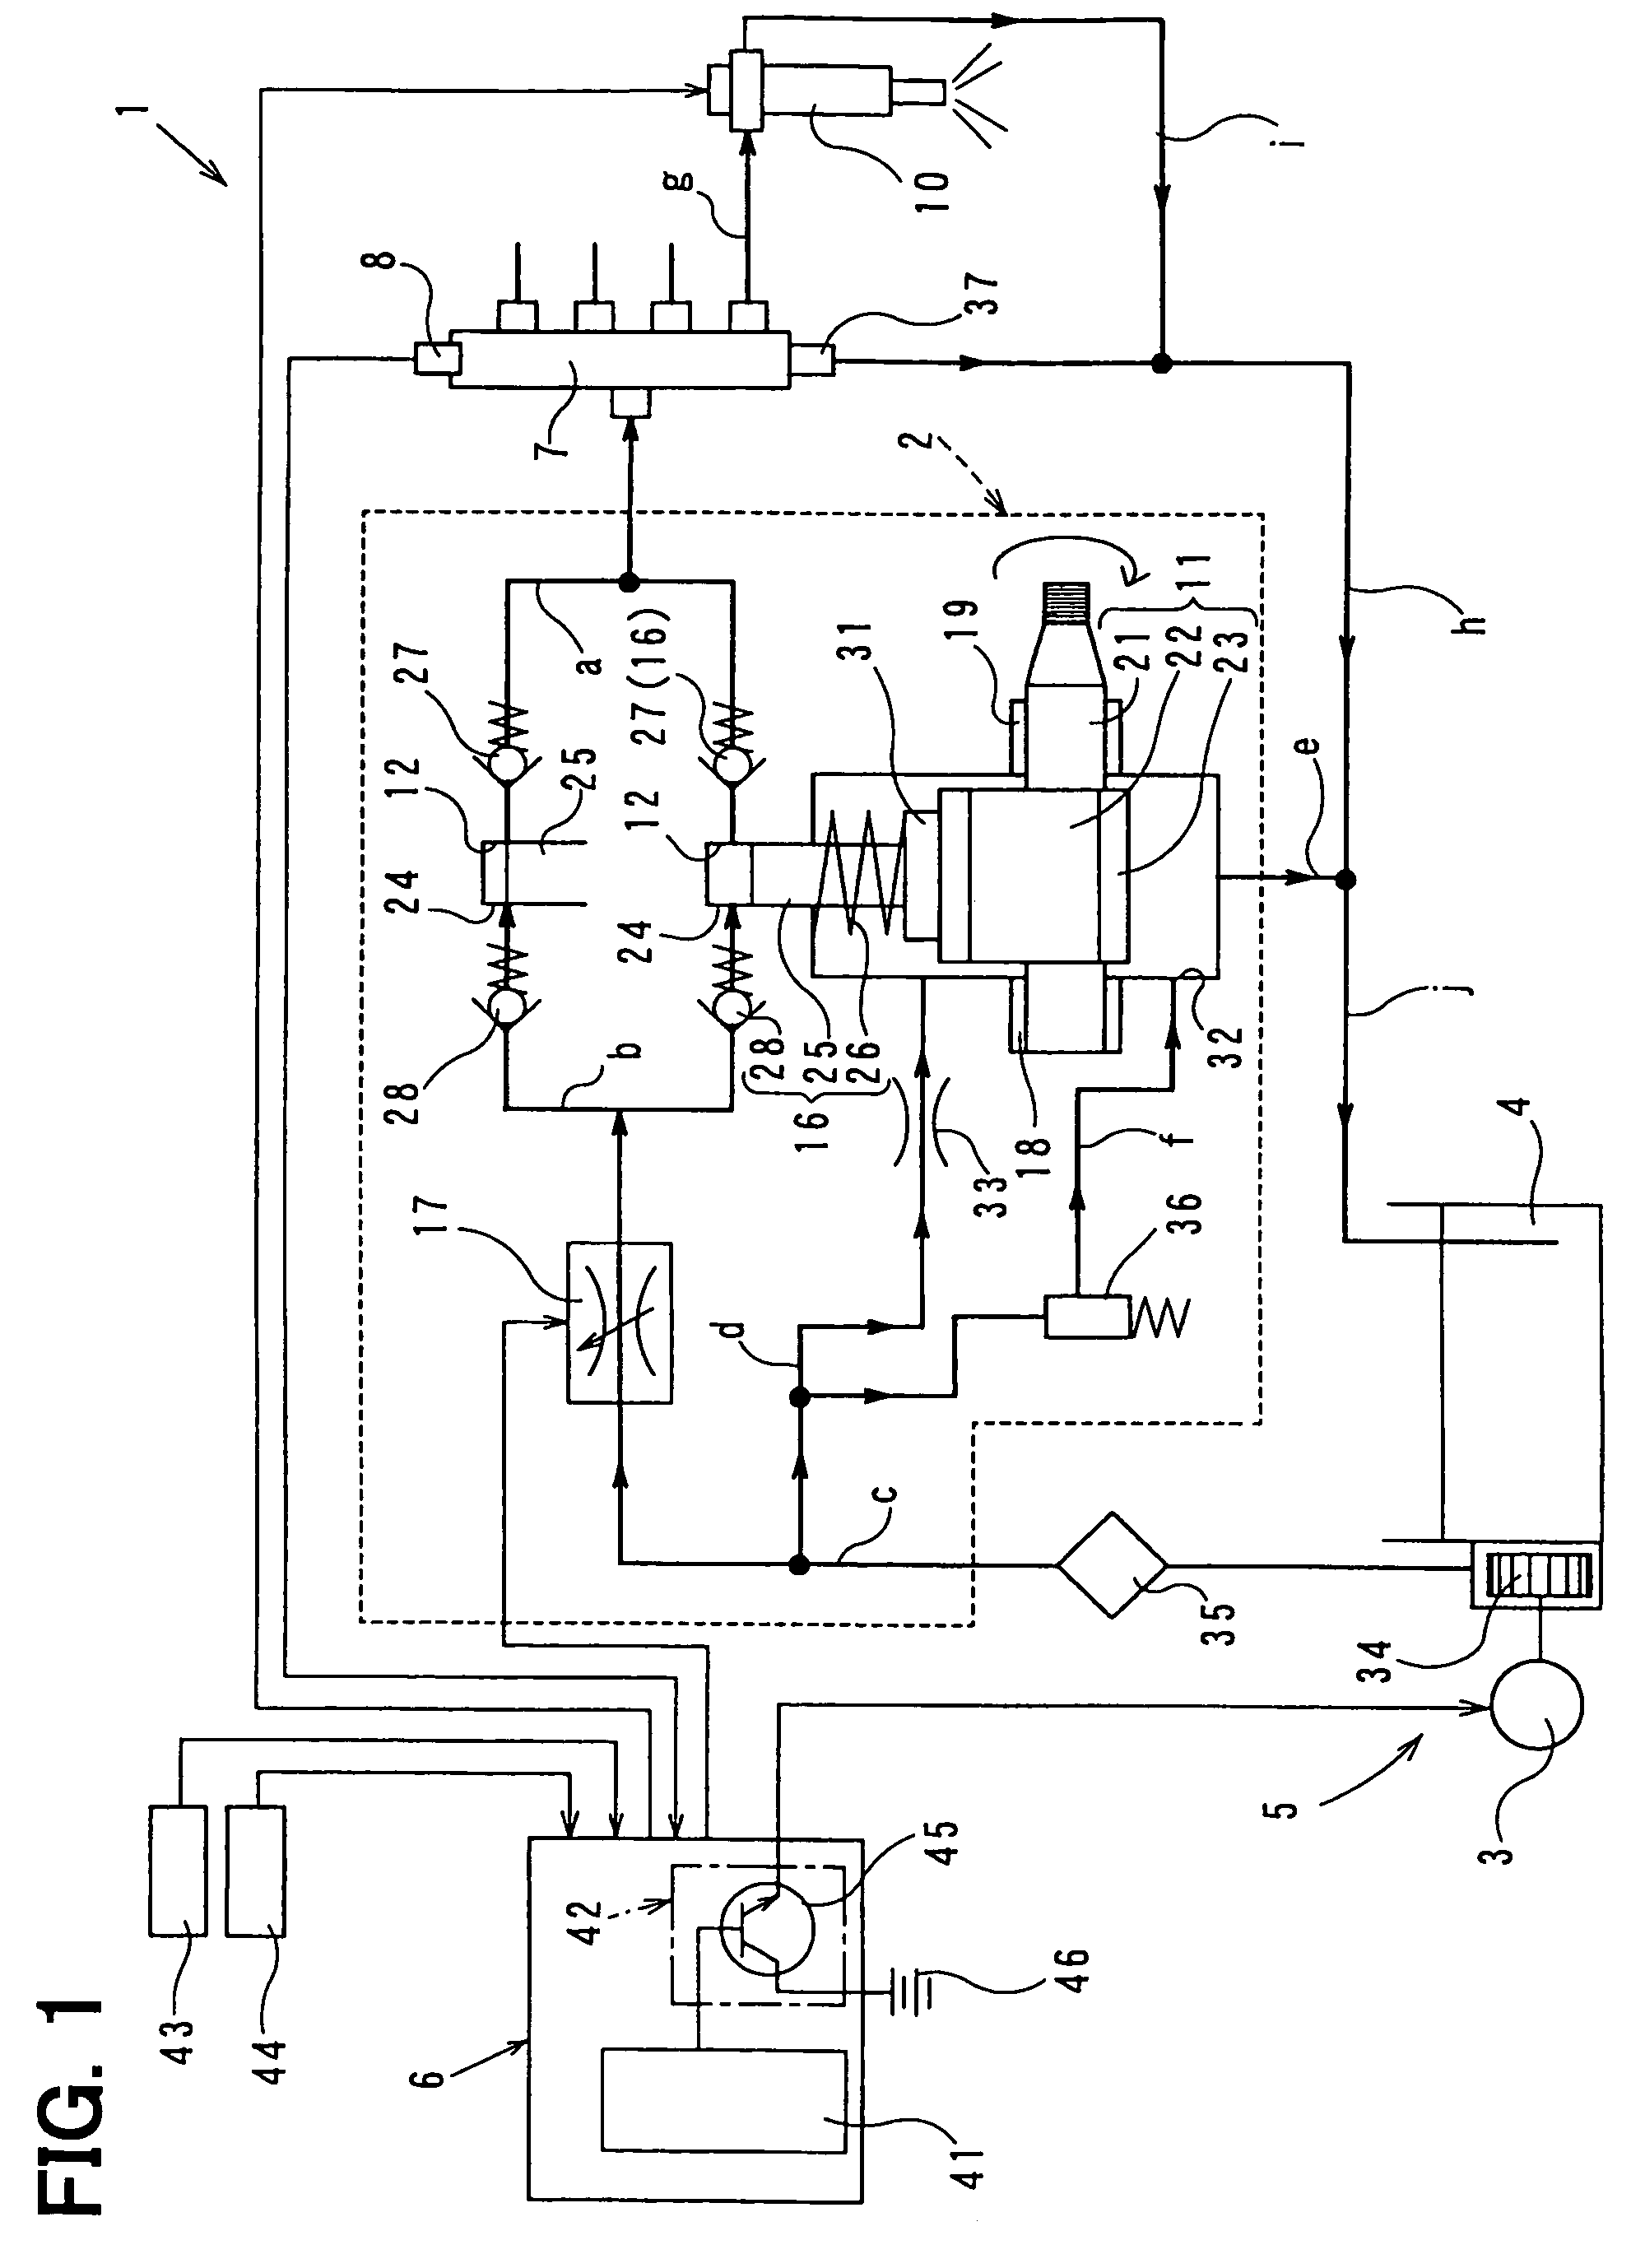 Fuel injection system having electric low-pressure pump